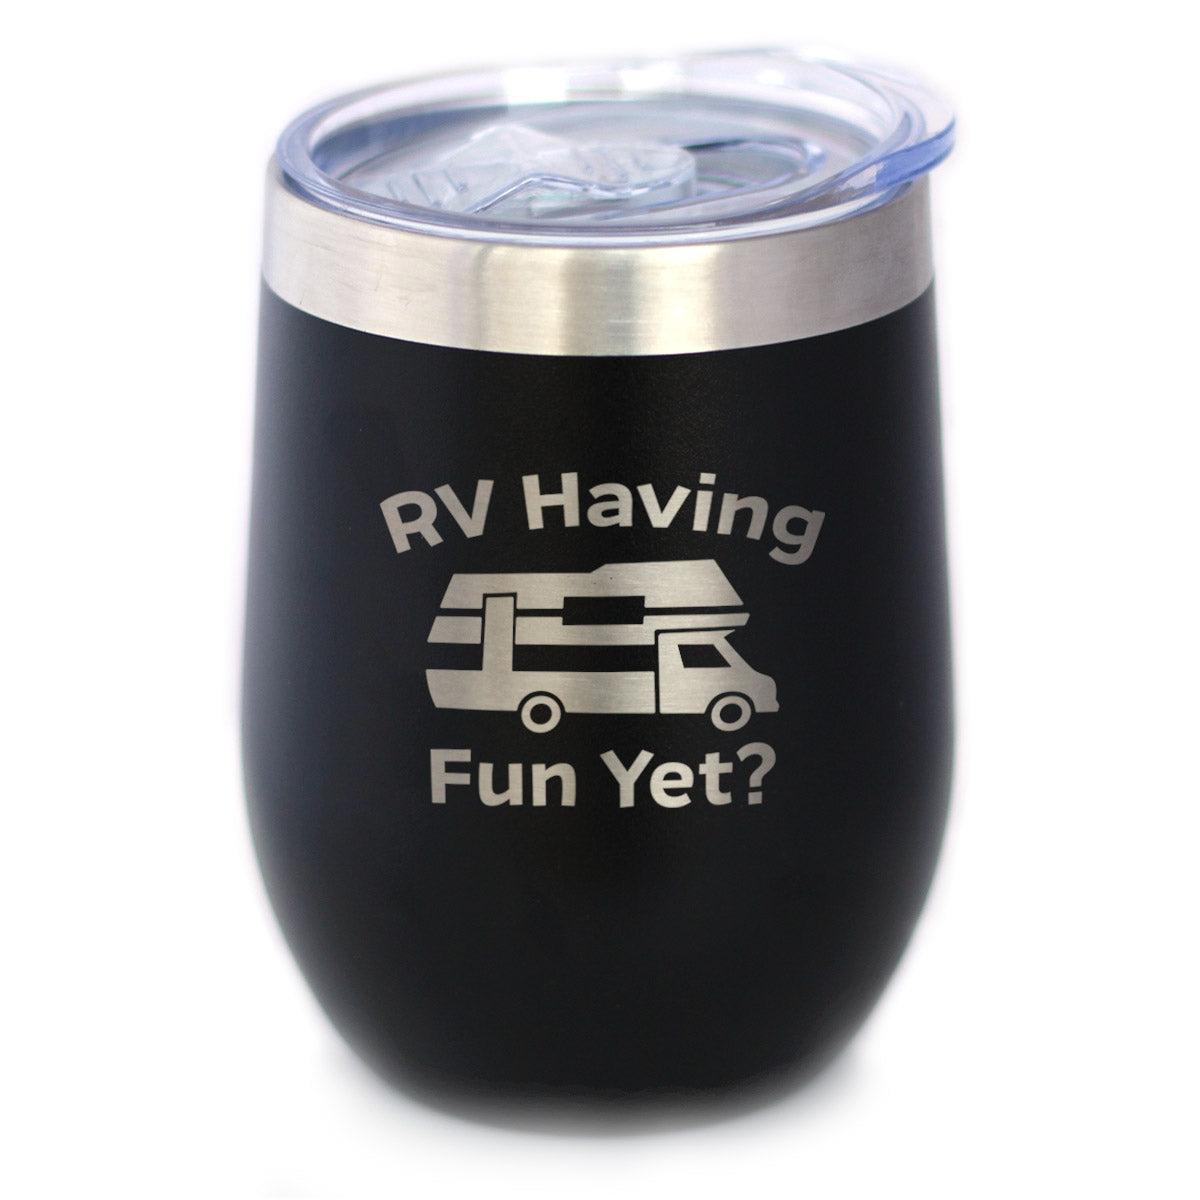 RV Having Fun Yet Wine Tumbler with Sliding Lid - Stemless Stainless Steel Insulated Cup - Cute Outdoor Camping Mug